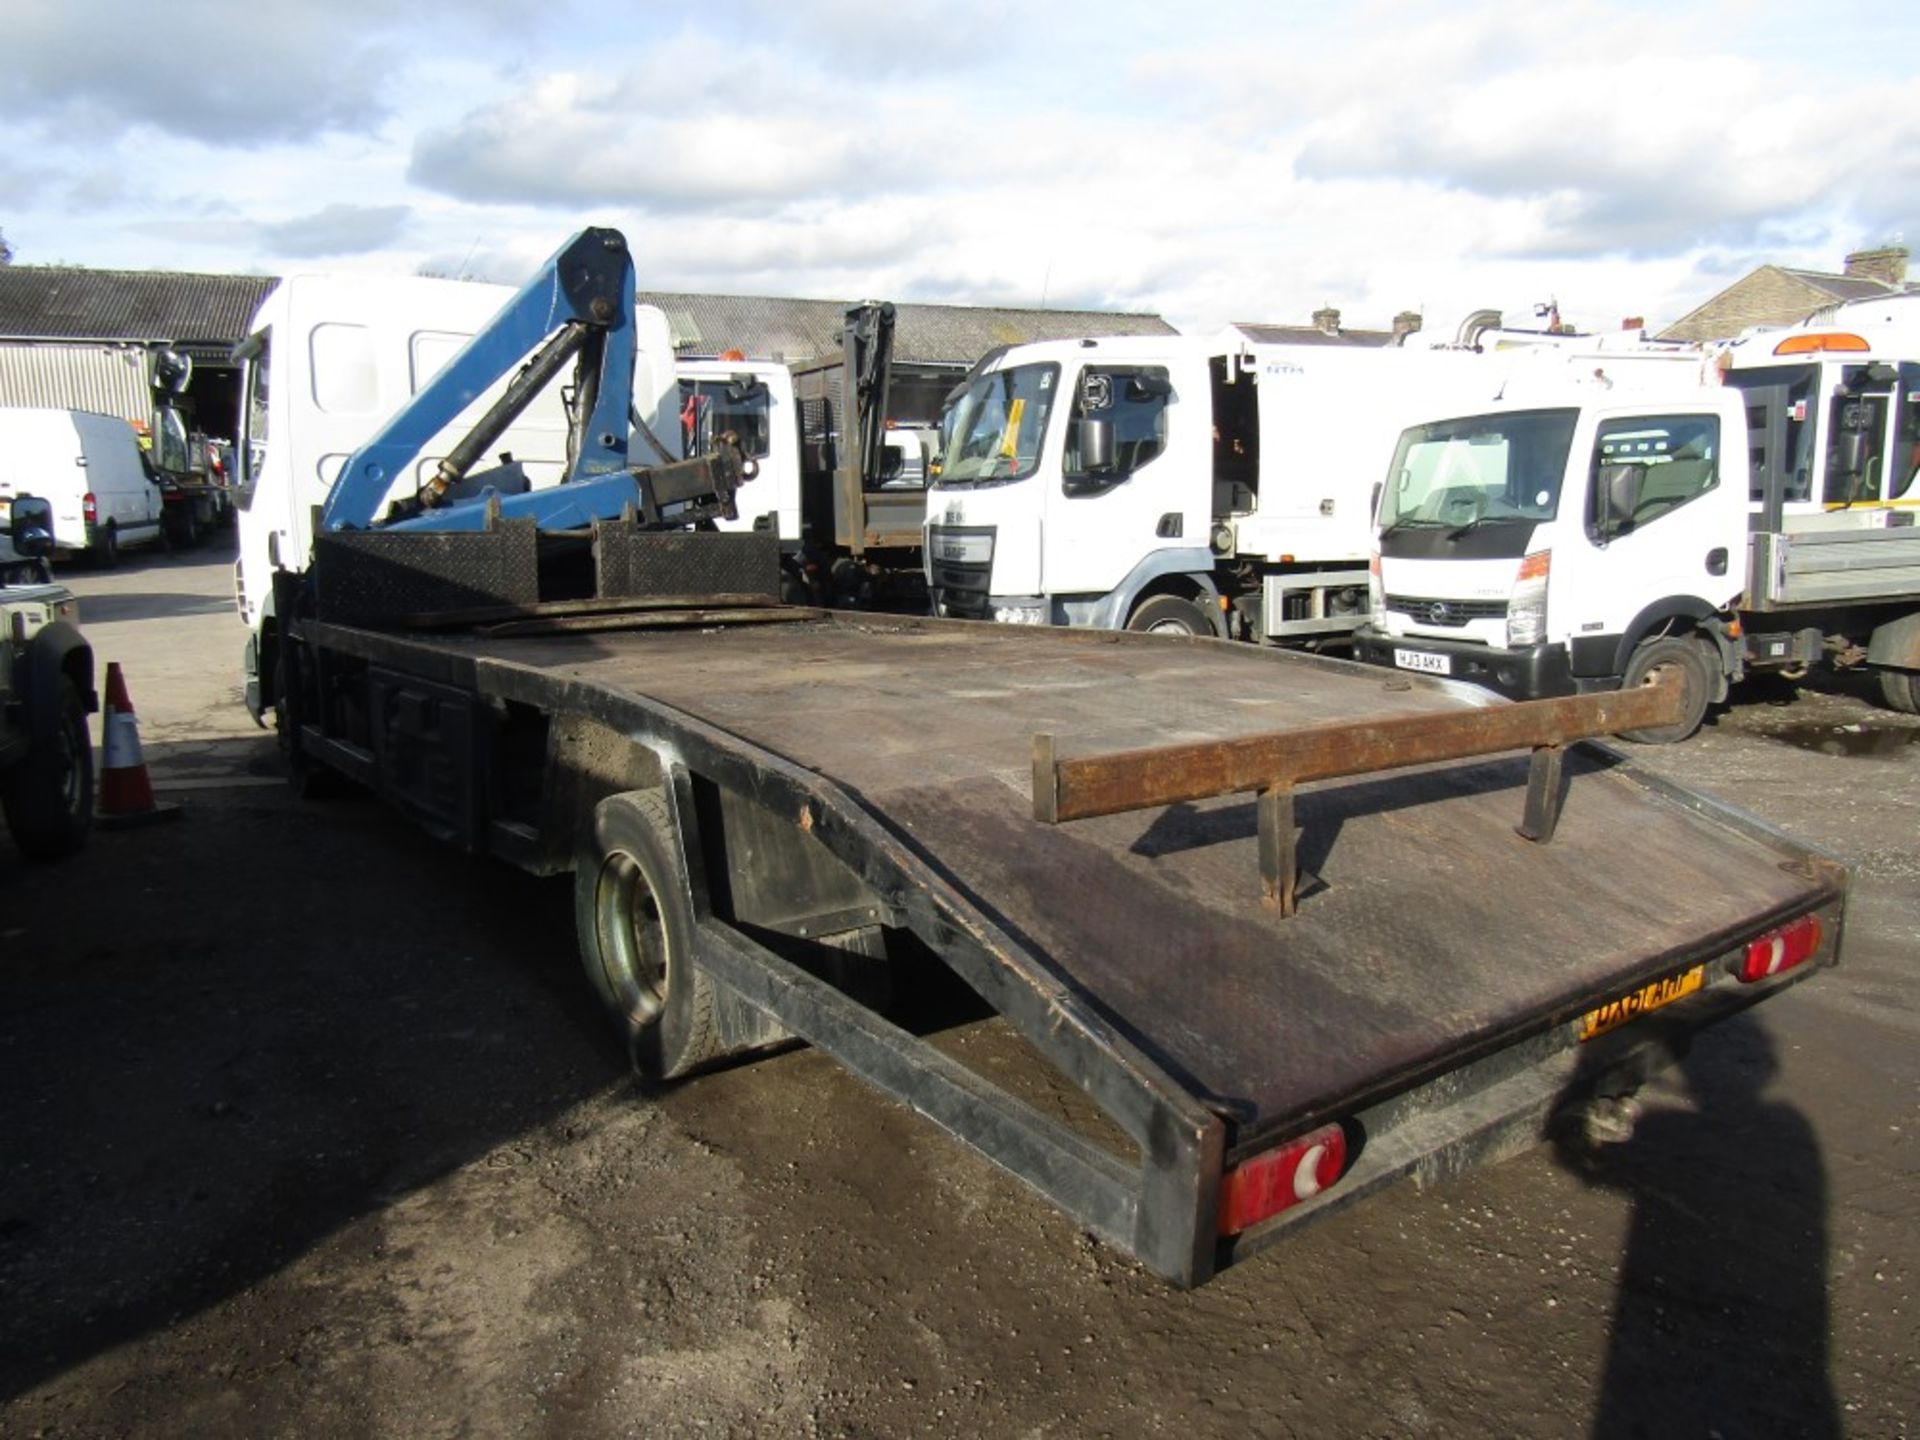 61 reg DAF FA LF45 RECOVERY C/W HIAB, 1ST REG 10/11, V5 HERE, 3 FORMER KEEPERS ]NO VAT] - Image 3 of 7